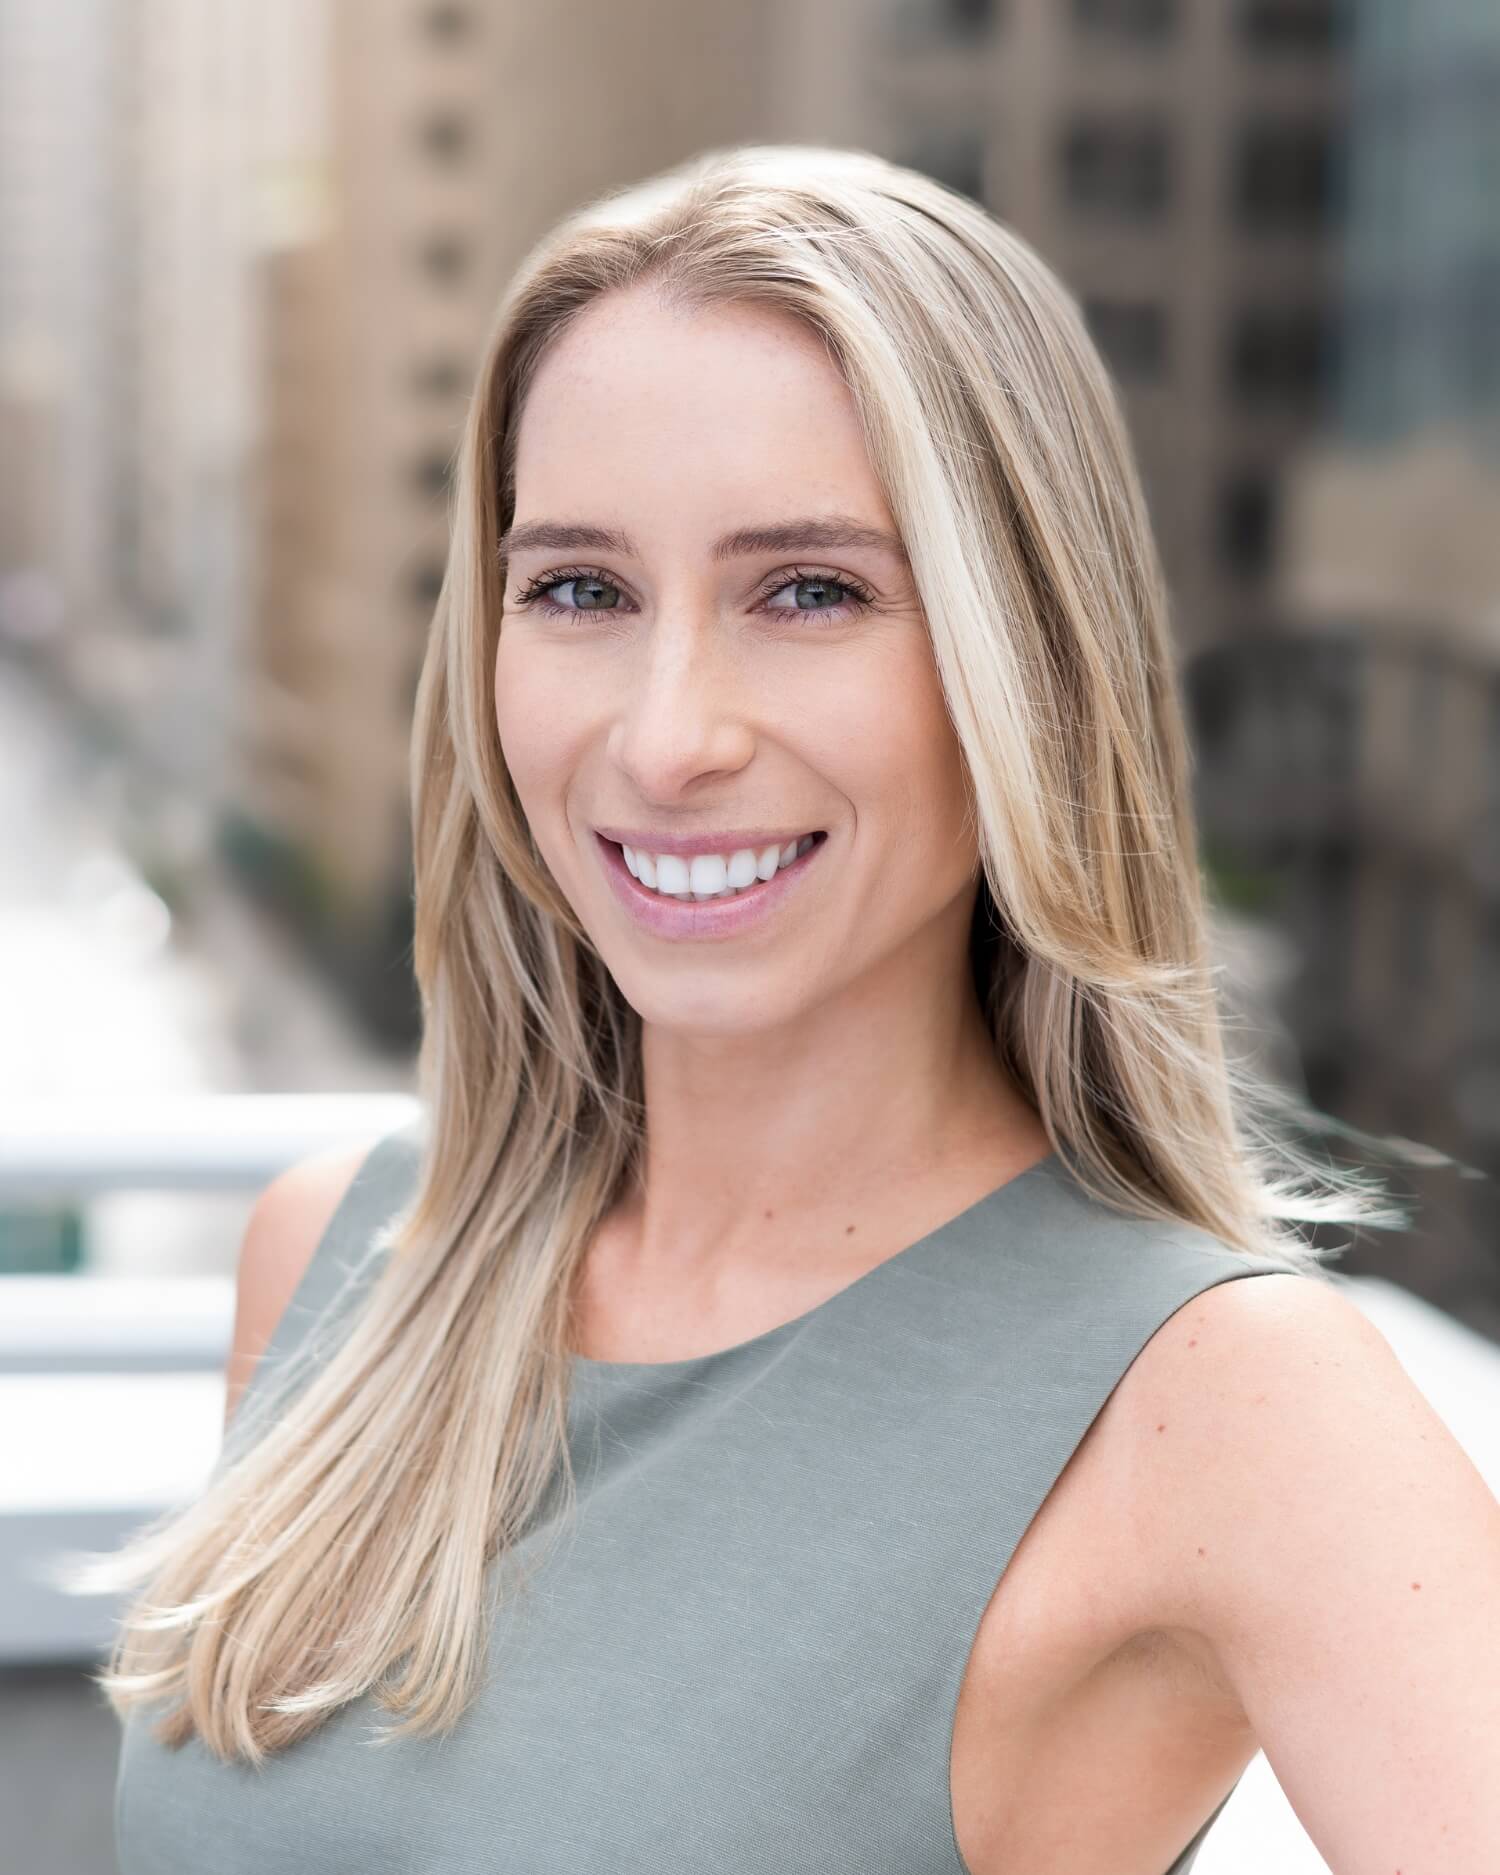 outdoor professional headshot of blonde young executive in urban setting